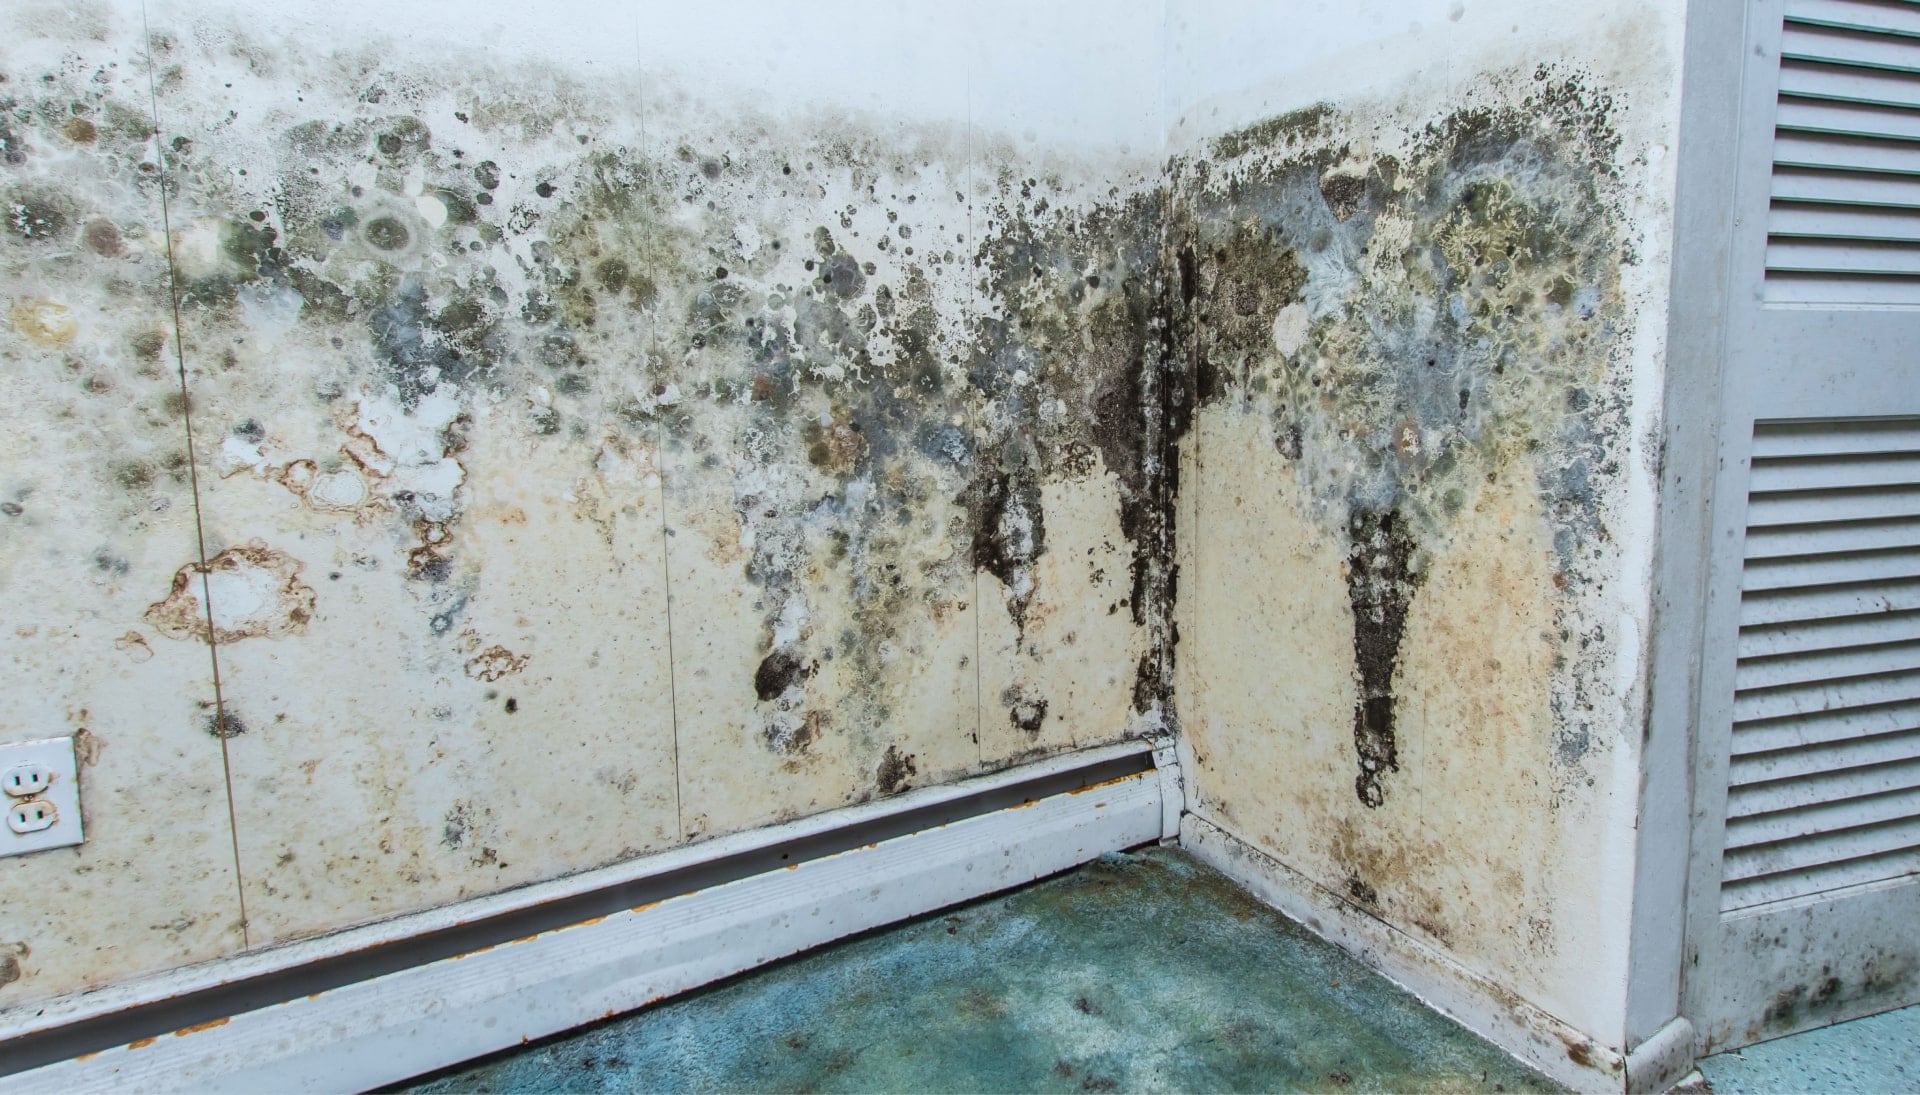 A mold remediation team using specialized techniques to remove mold damage and control odors in a Miramar property, with a focus on safety and efficiency